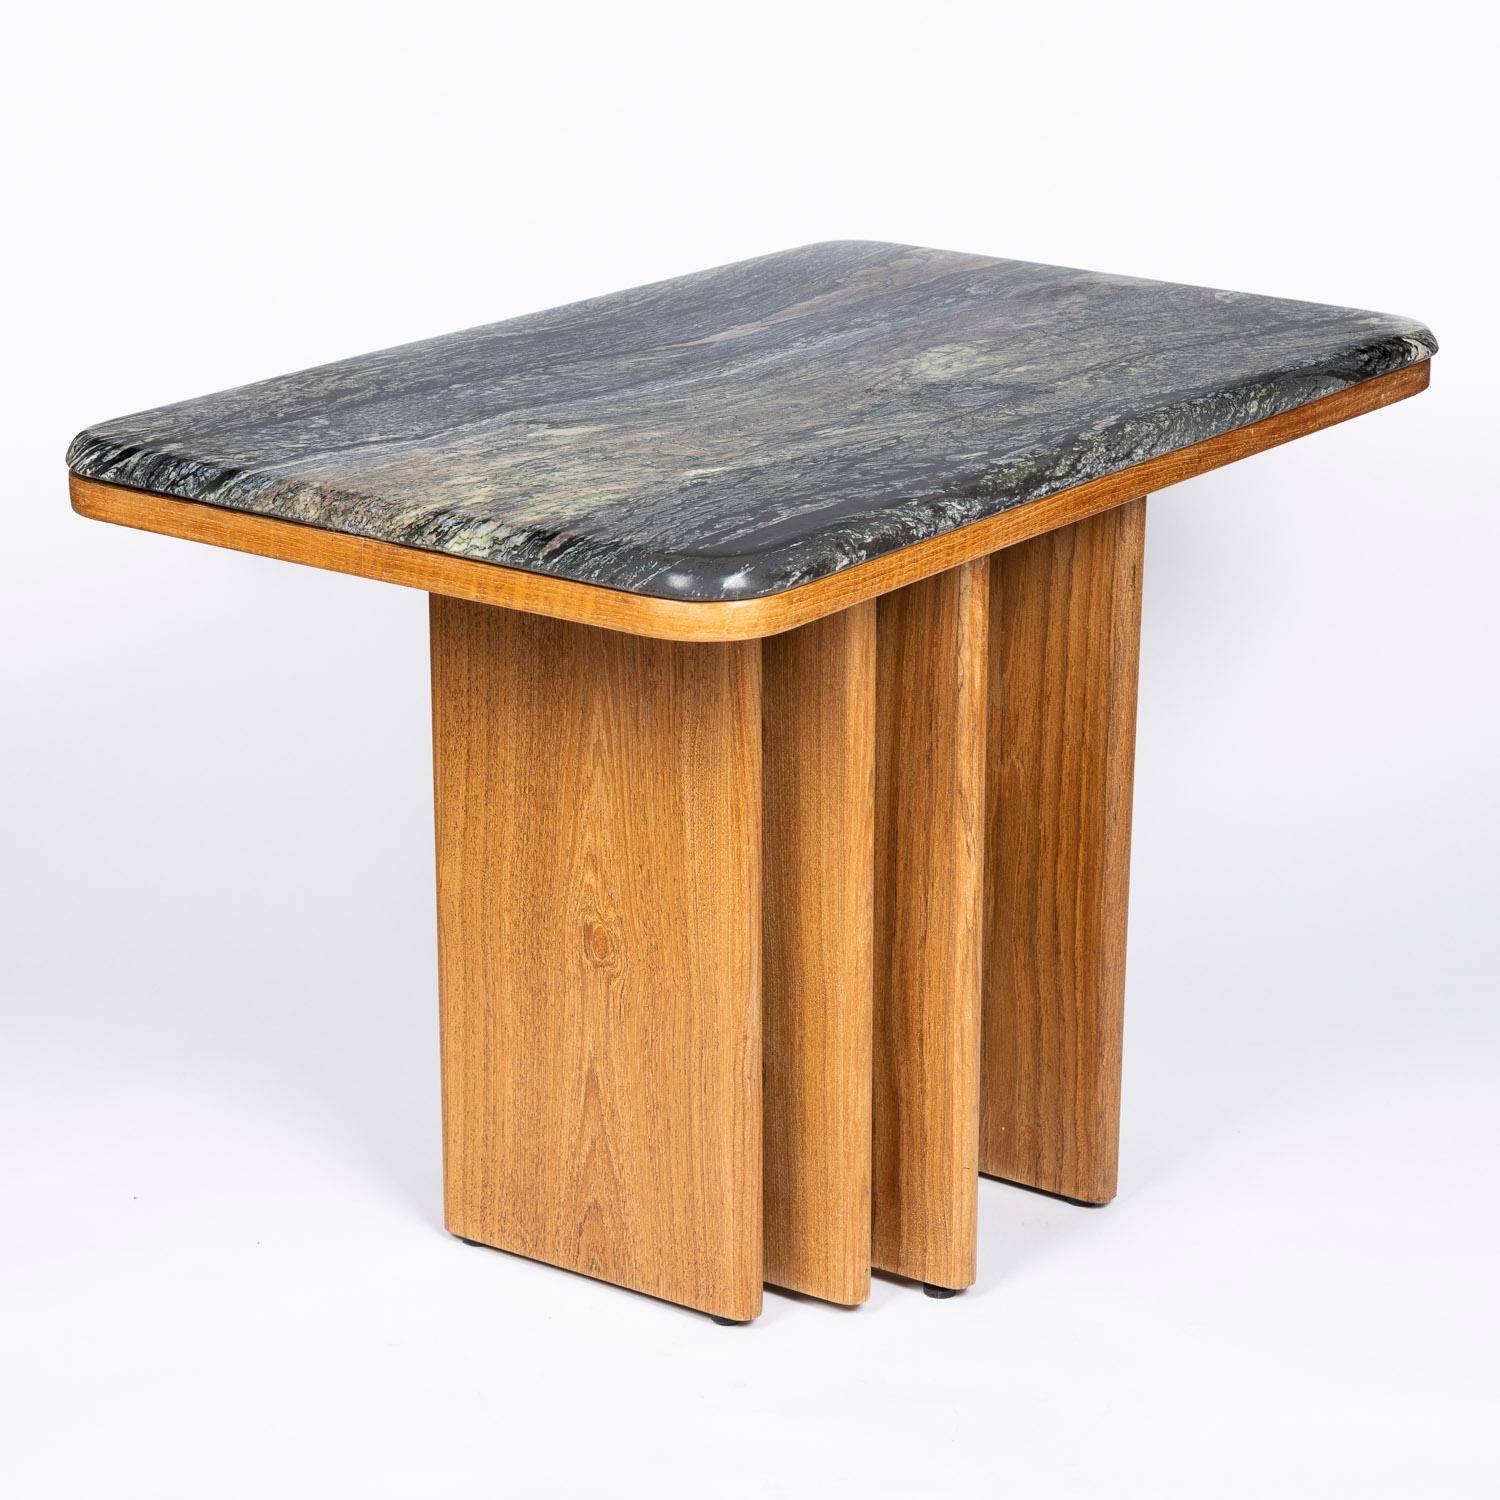 A 1970s side table with Gneiss top by Bendixen Design of Demark.


Gneiss is a coarse-grained metamorphic rock showing compositional banding, the minerals in gneiss are arranged into layers that appear as bands in cross section, this is called